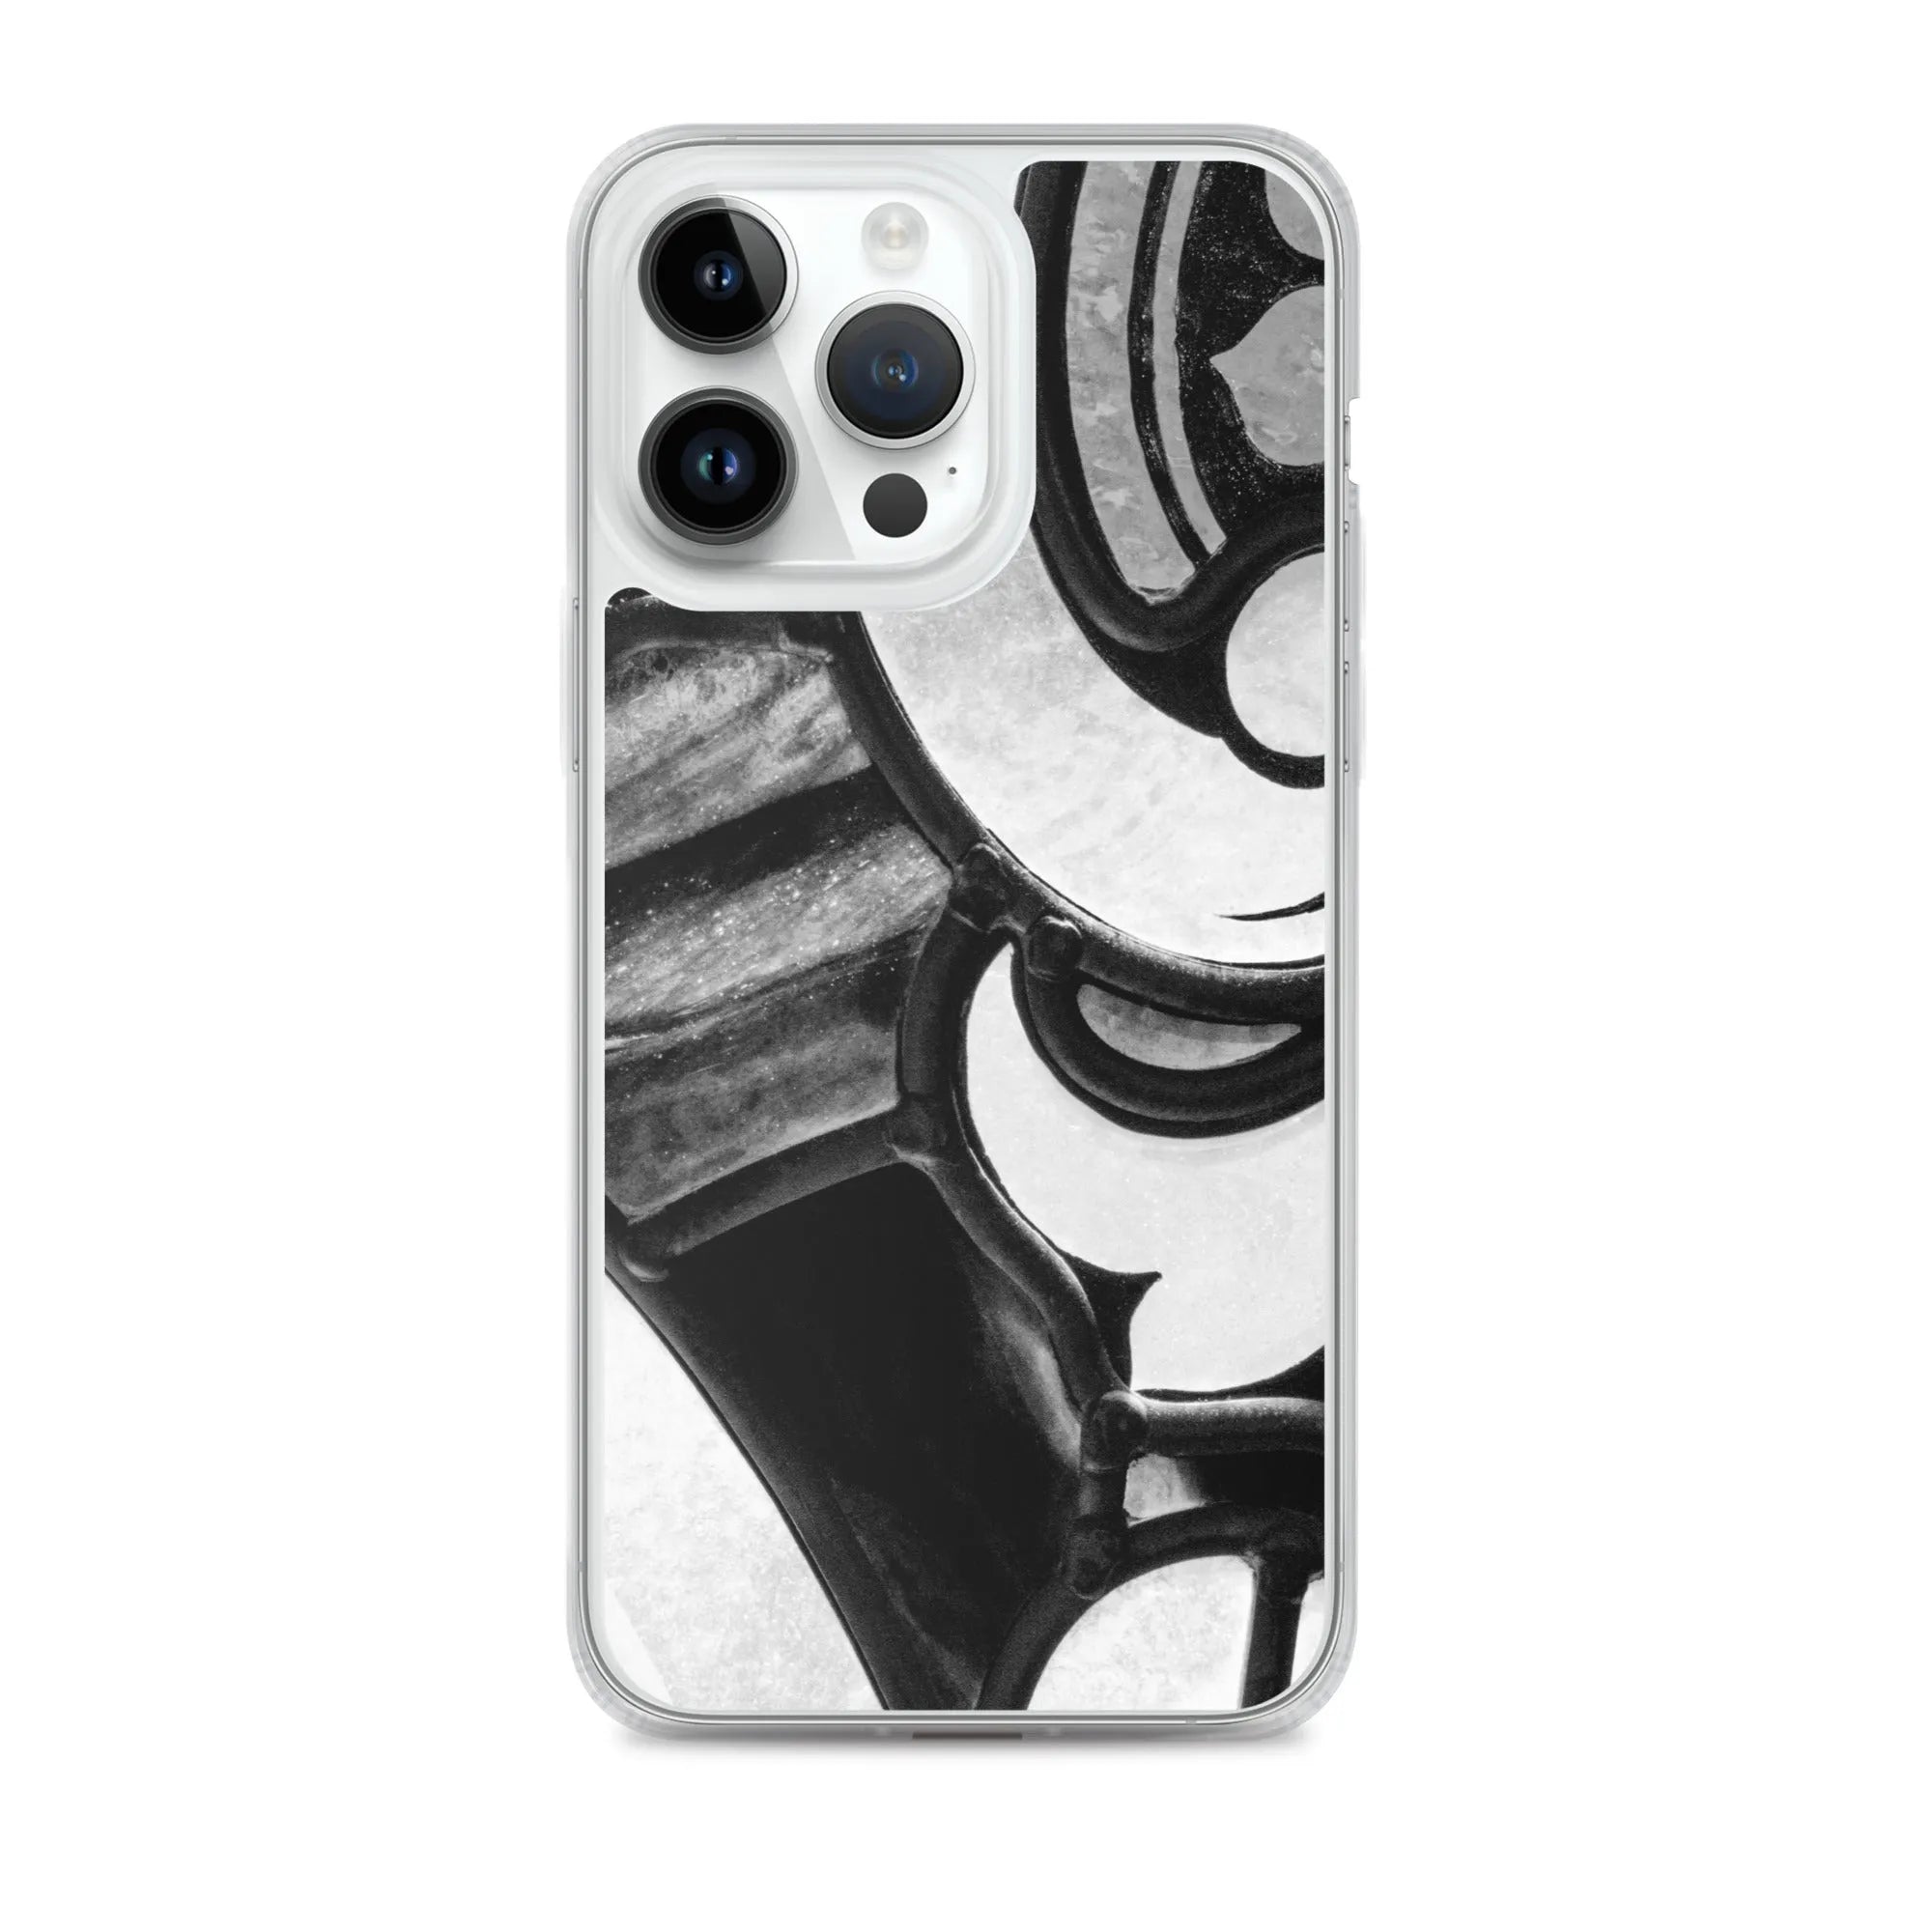 Stay Glassy - Designer Travels Art Iphone Case - Black And White - Iphone 14 Pro Max - Mobile Phone Cases - Aesthetic